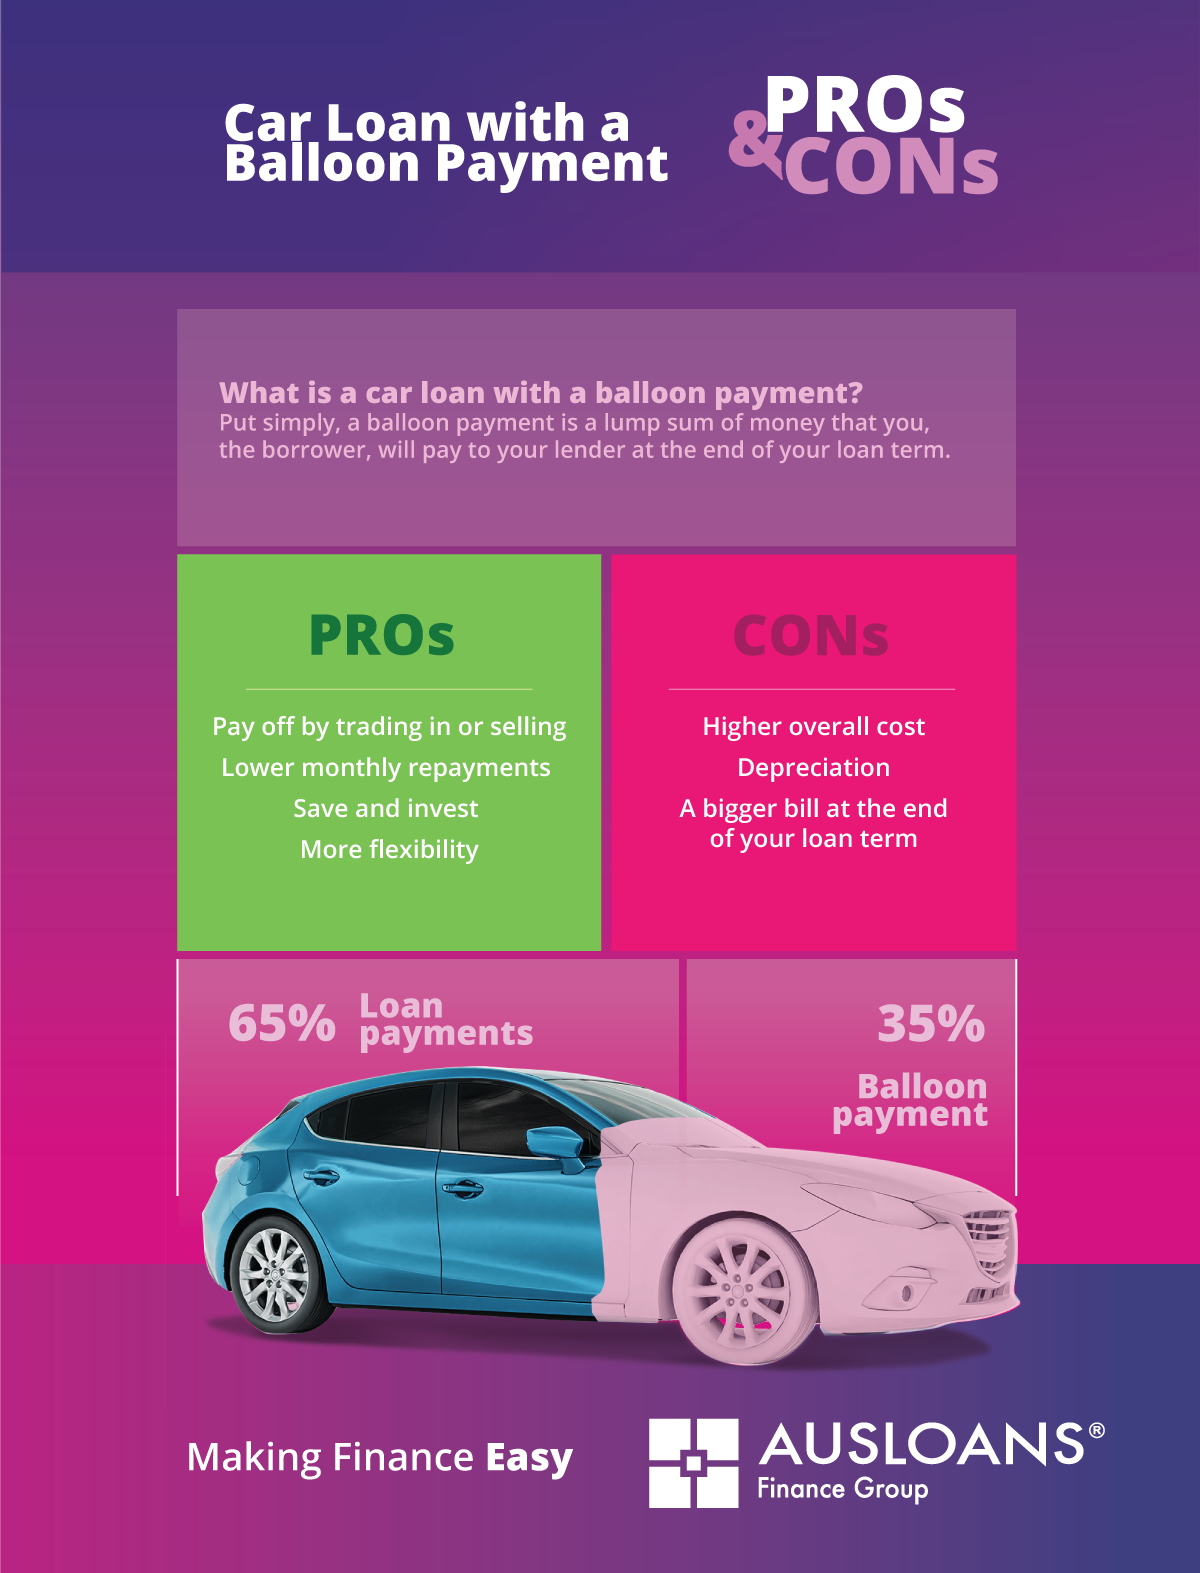 AUS_Balloon-payment-infographic-3a